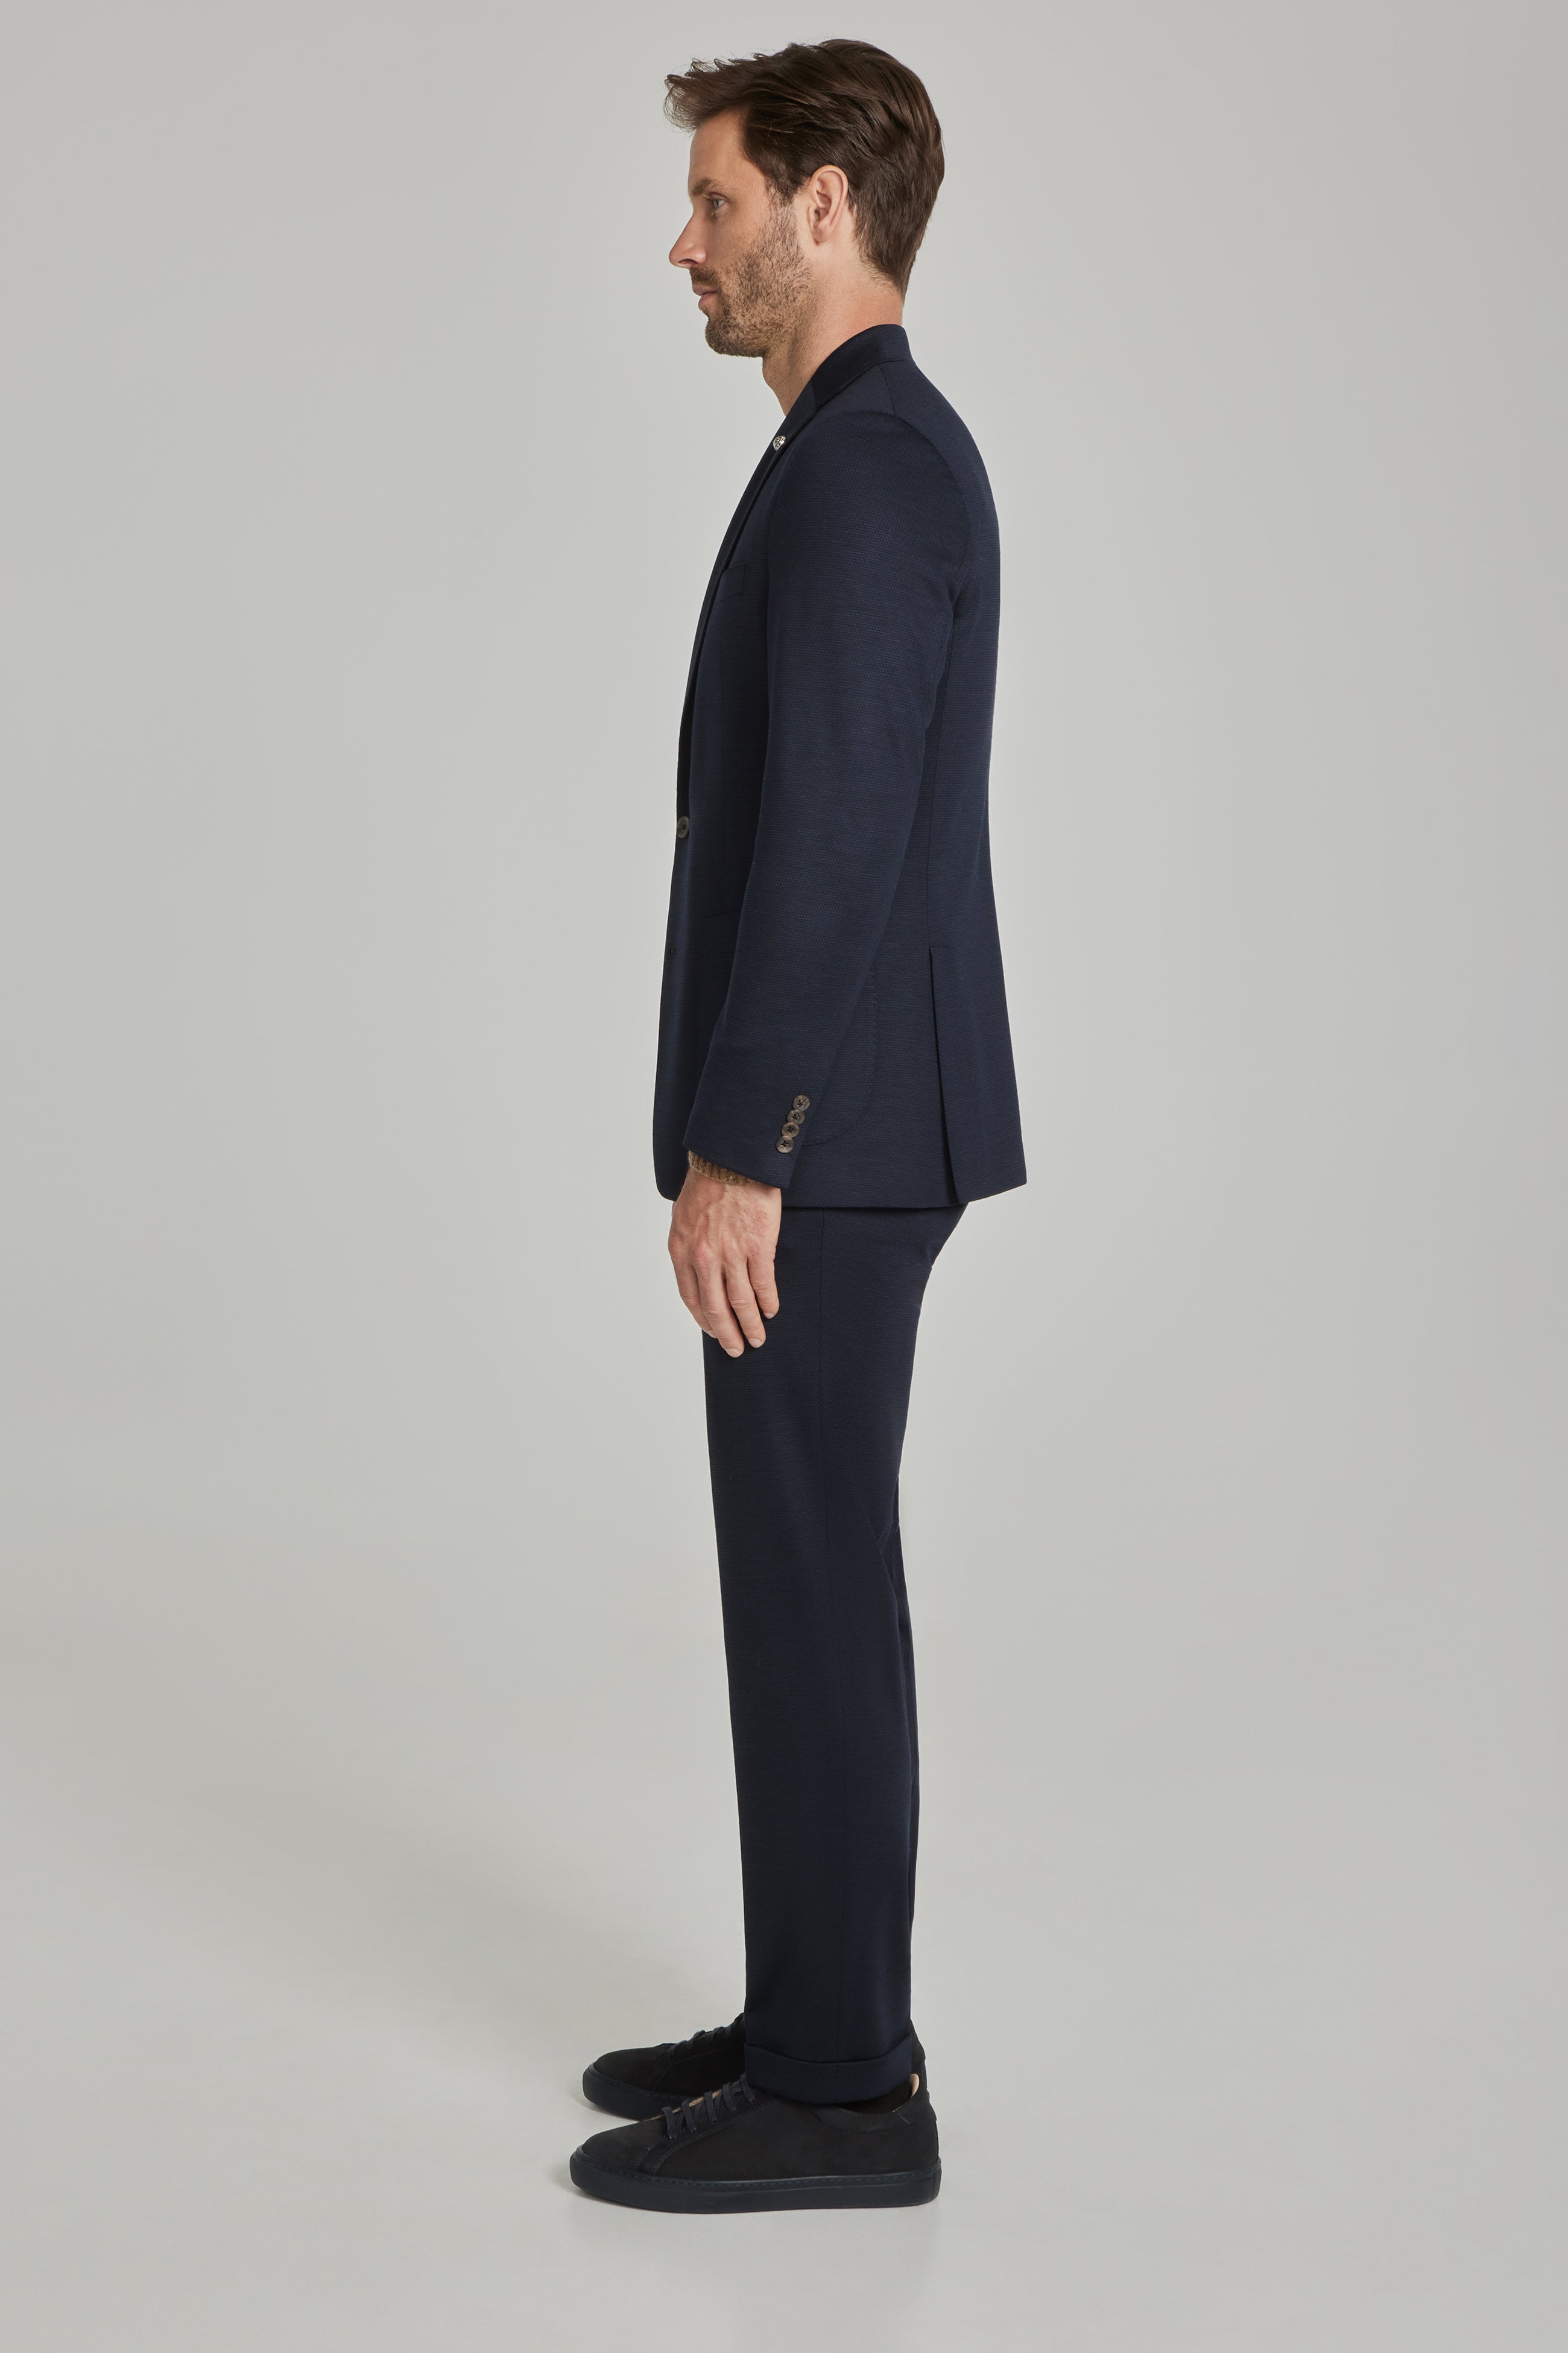 Alt view 2 Hartford Neat Wool Stretch Suit in Navy